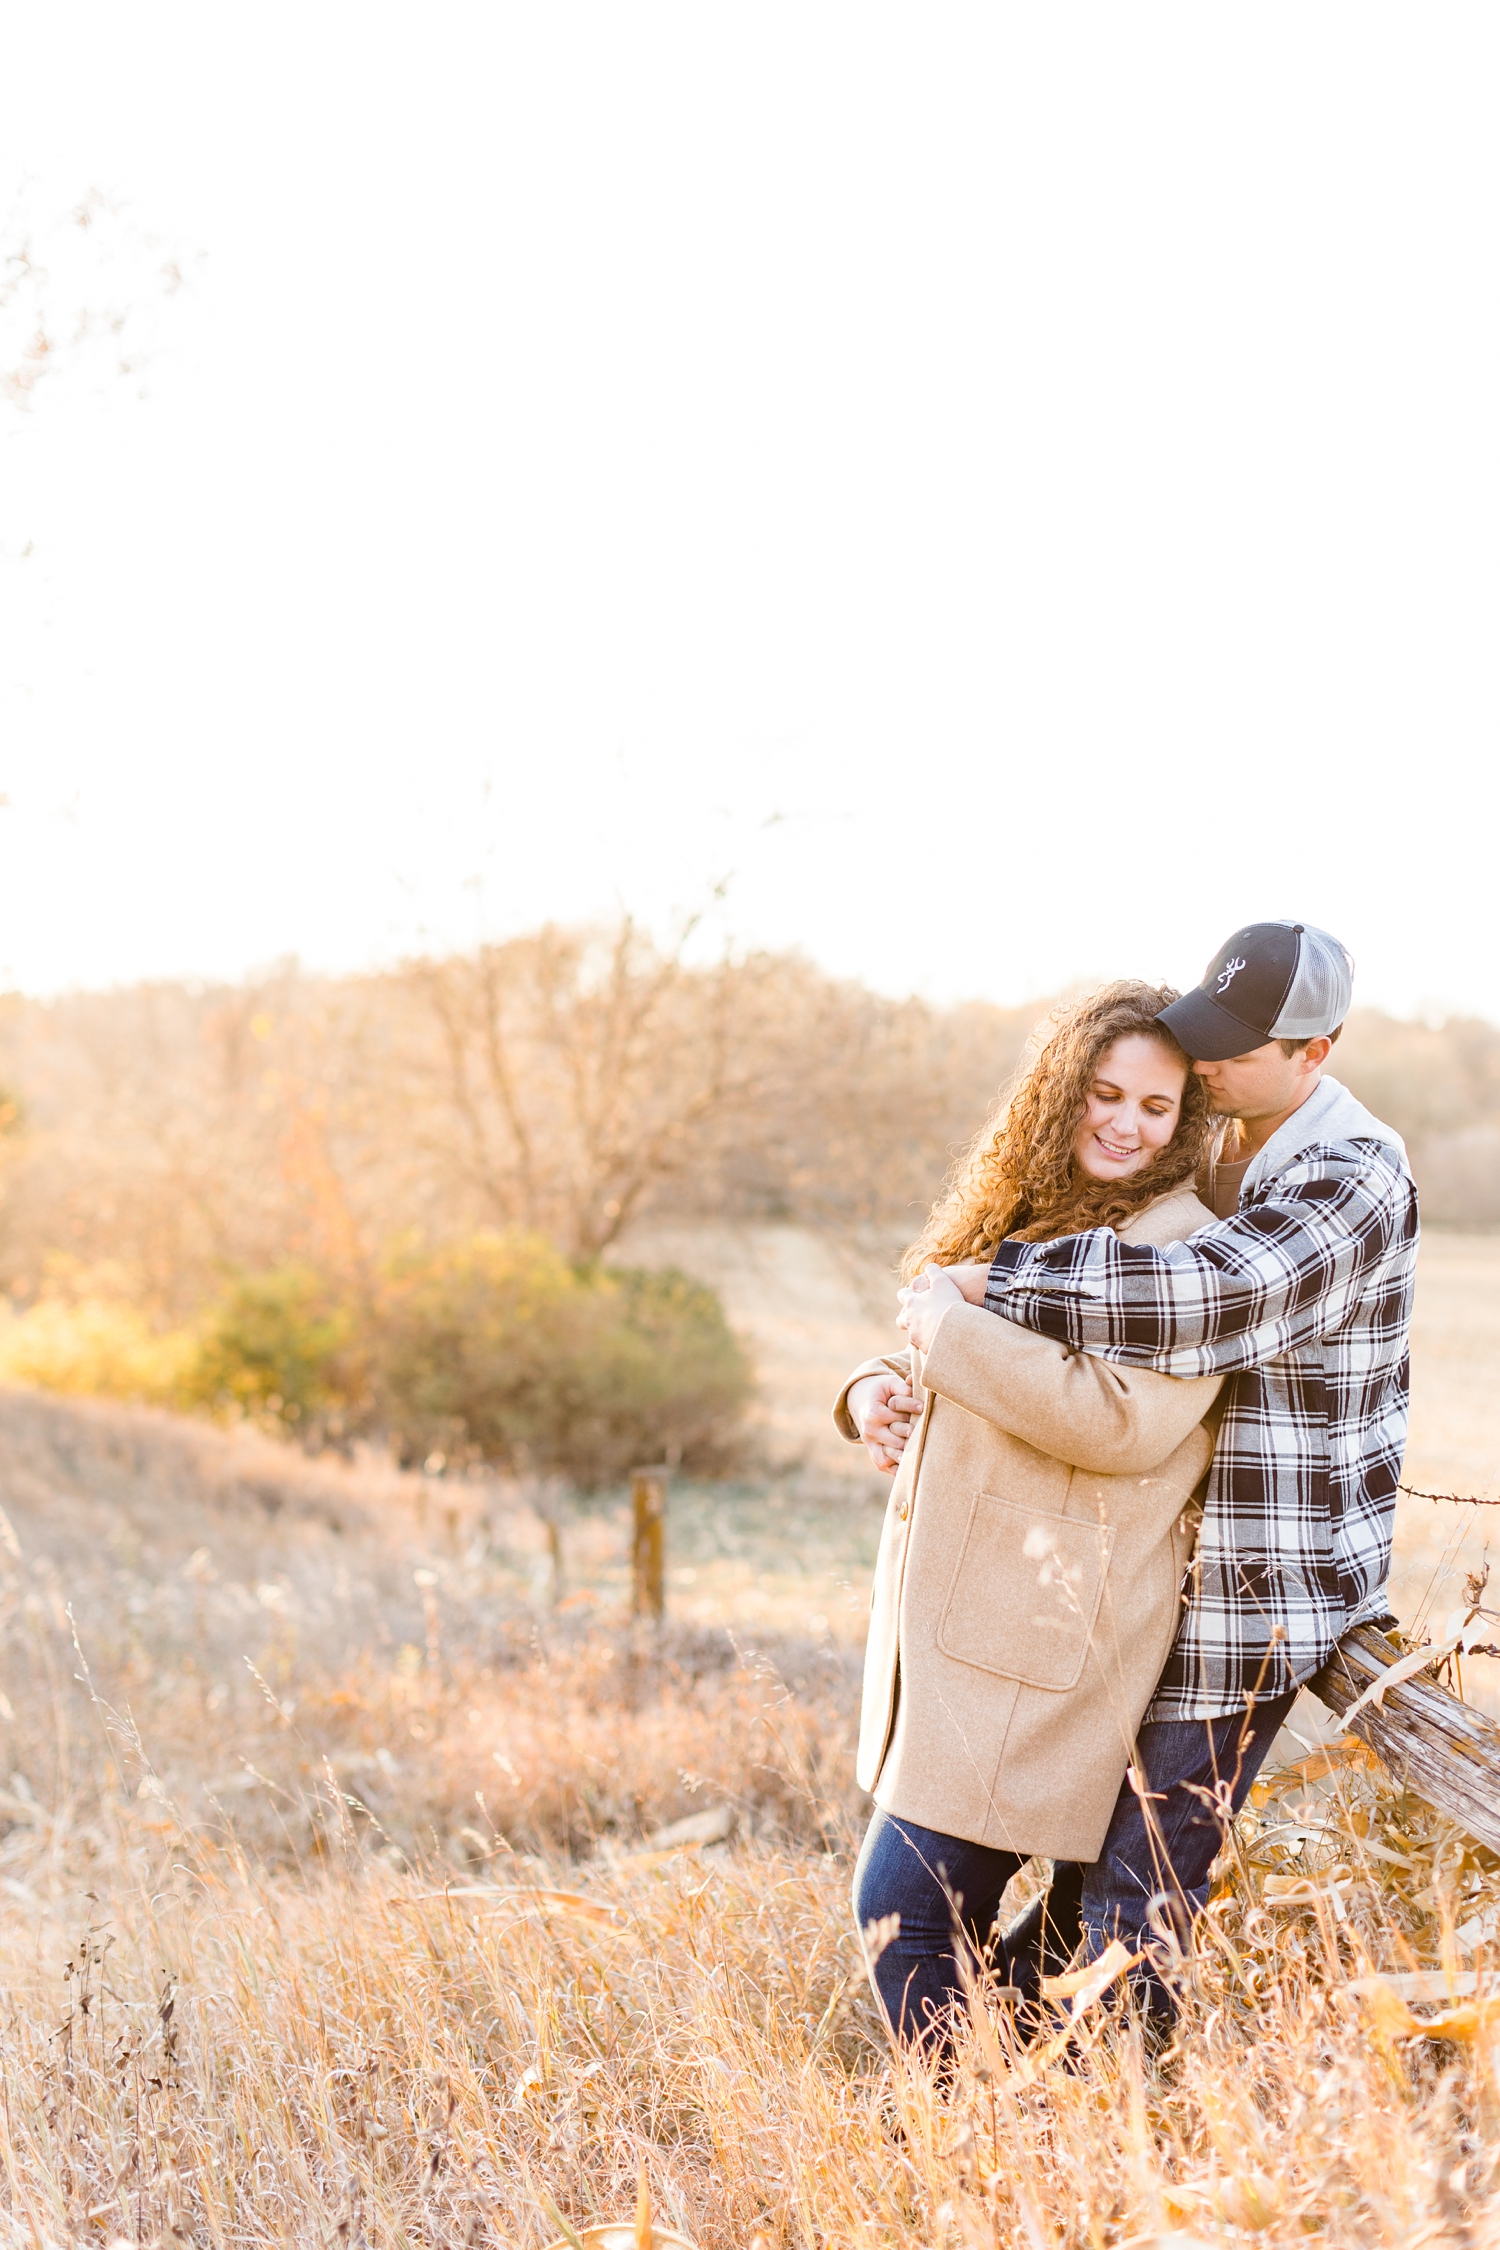 Dakota hugs Holly as they lean against a wooden fence along an Iowa pasture | CB Studio